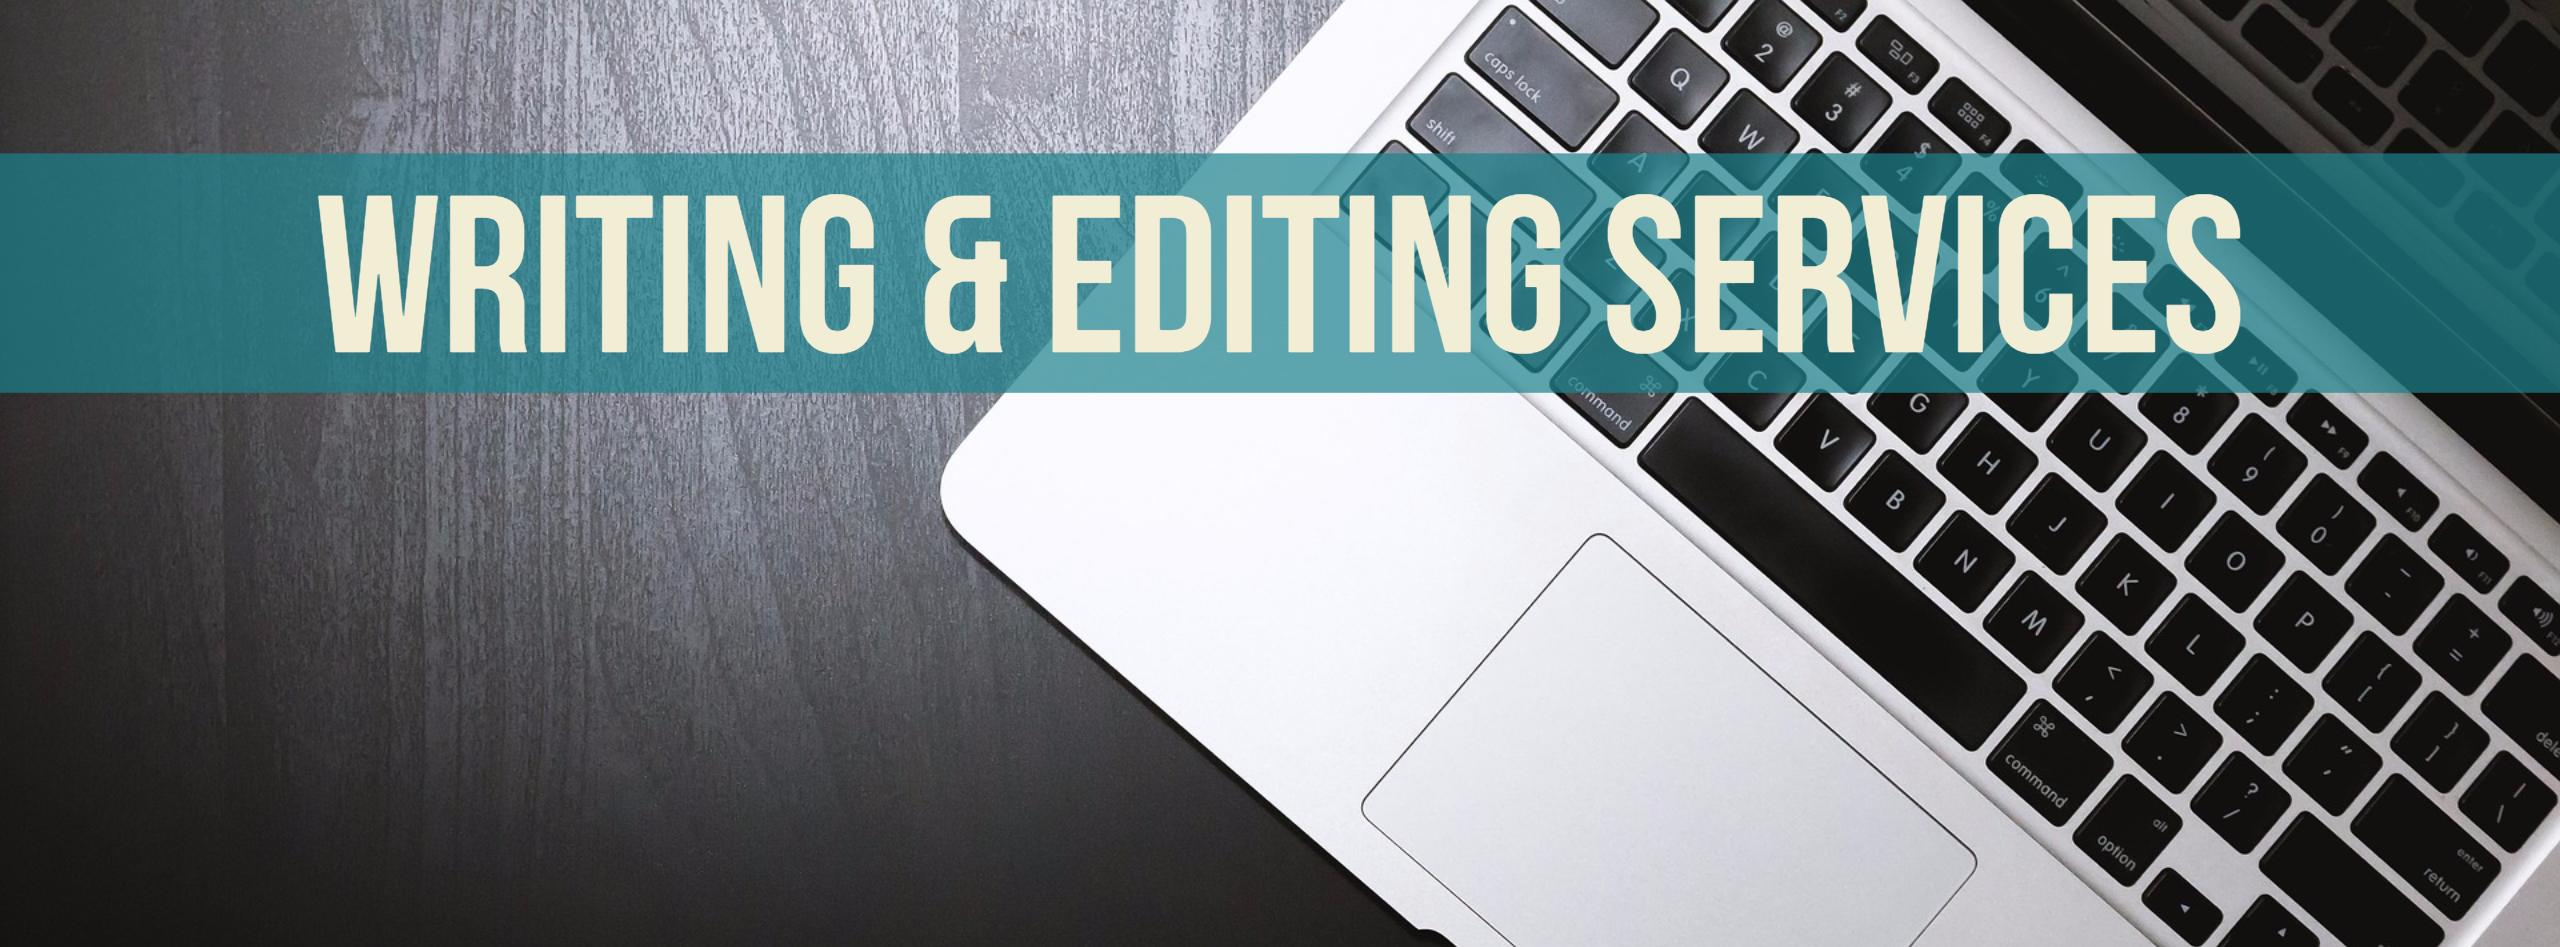 Office services editing writing services